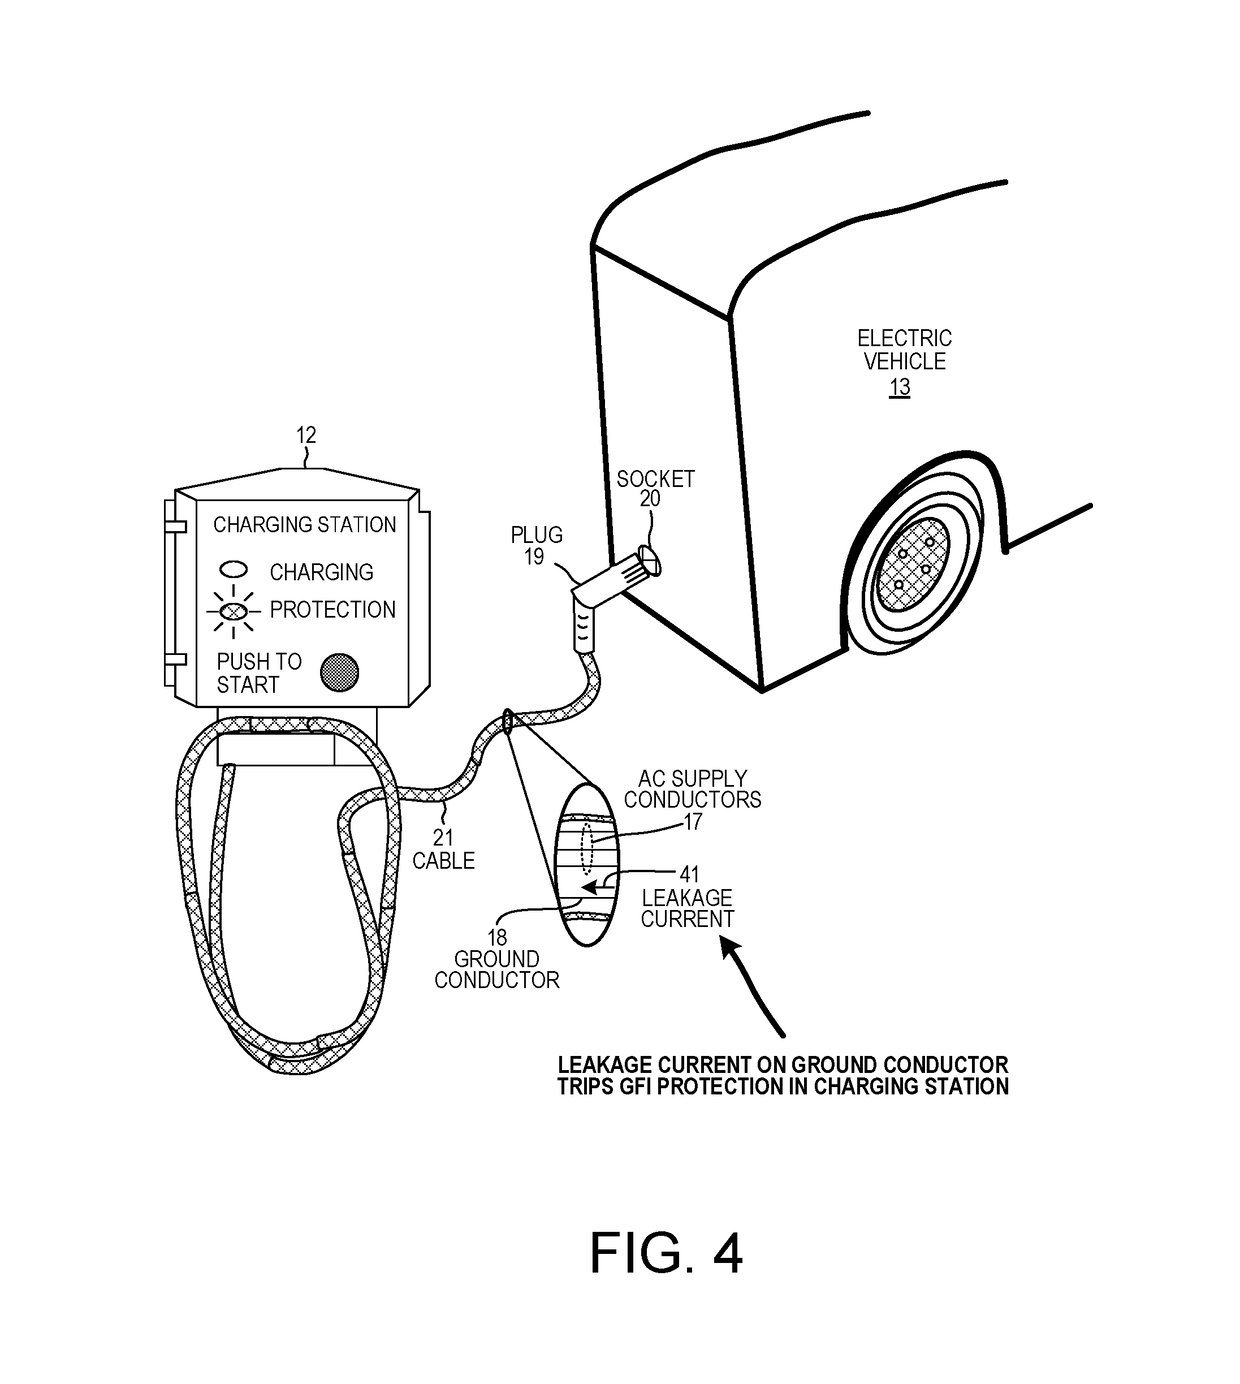 Generating leakage canceling current in electric vehicle charging systems